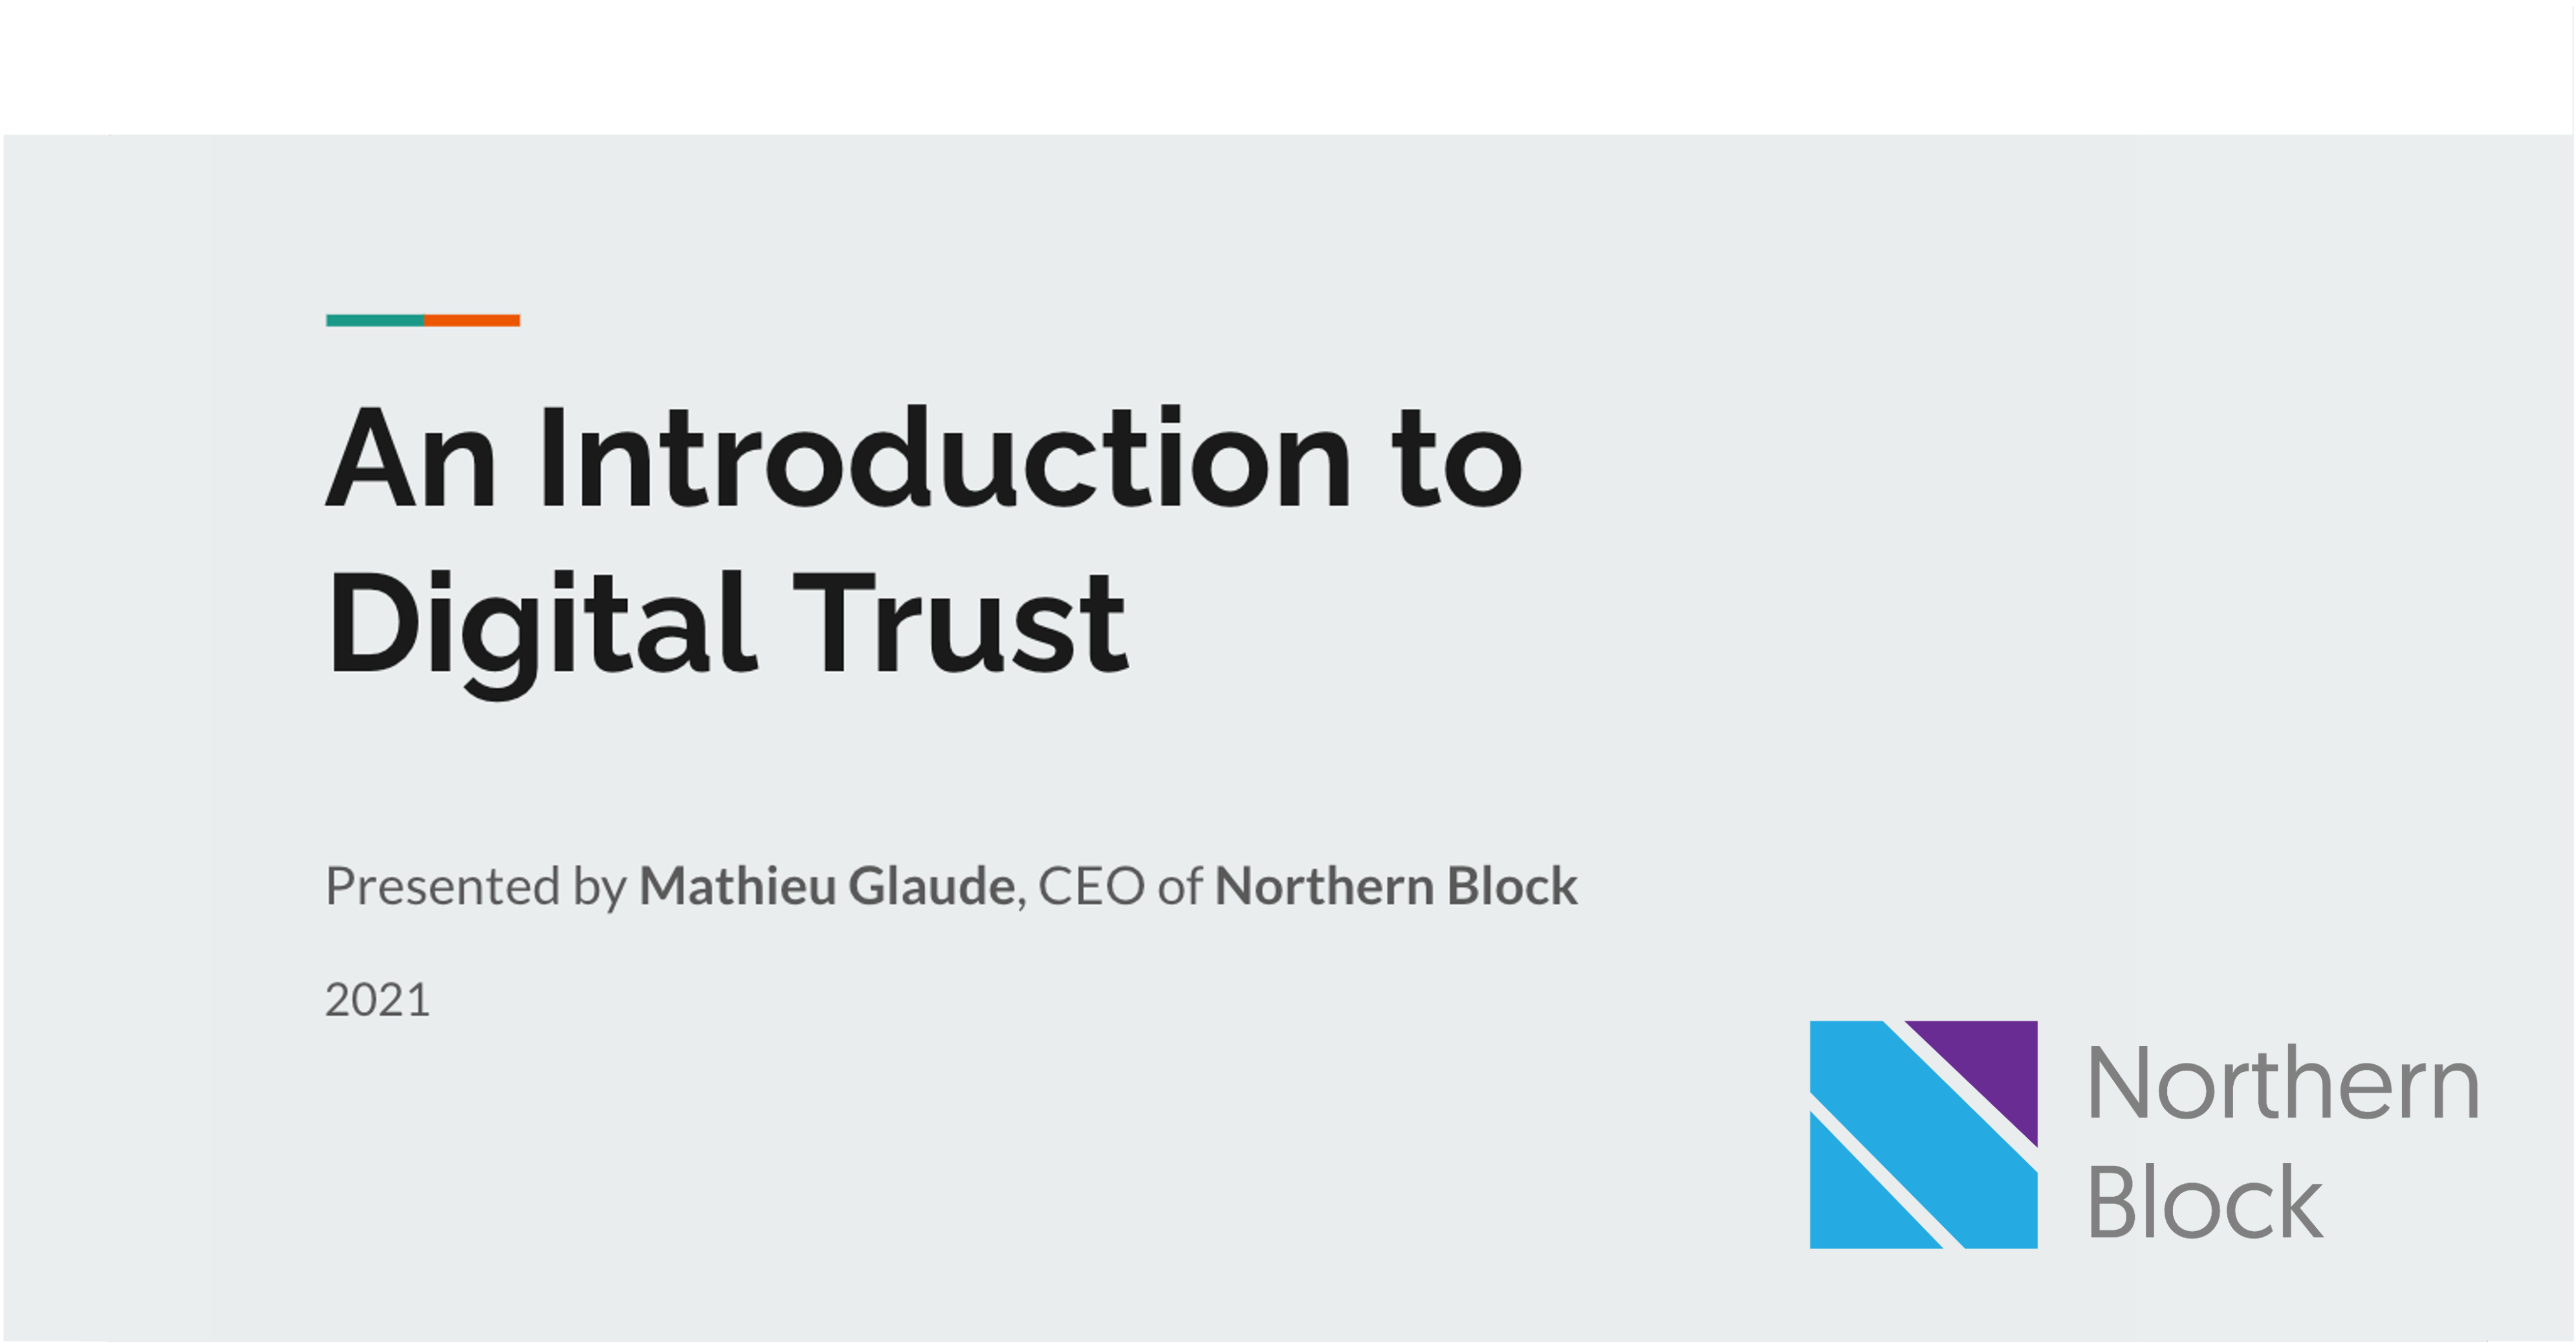 An Introduction to Digital Trust